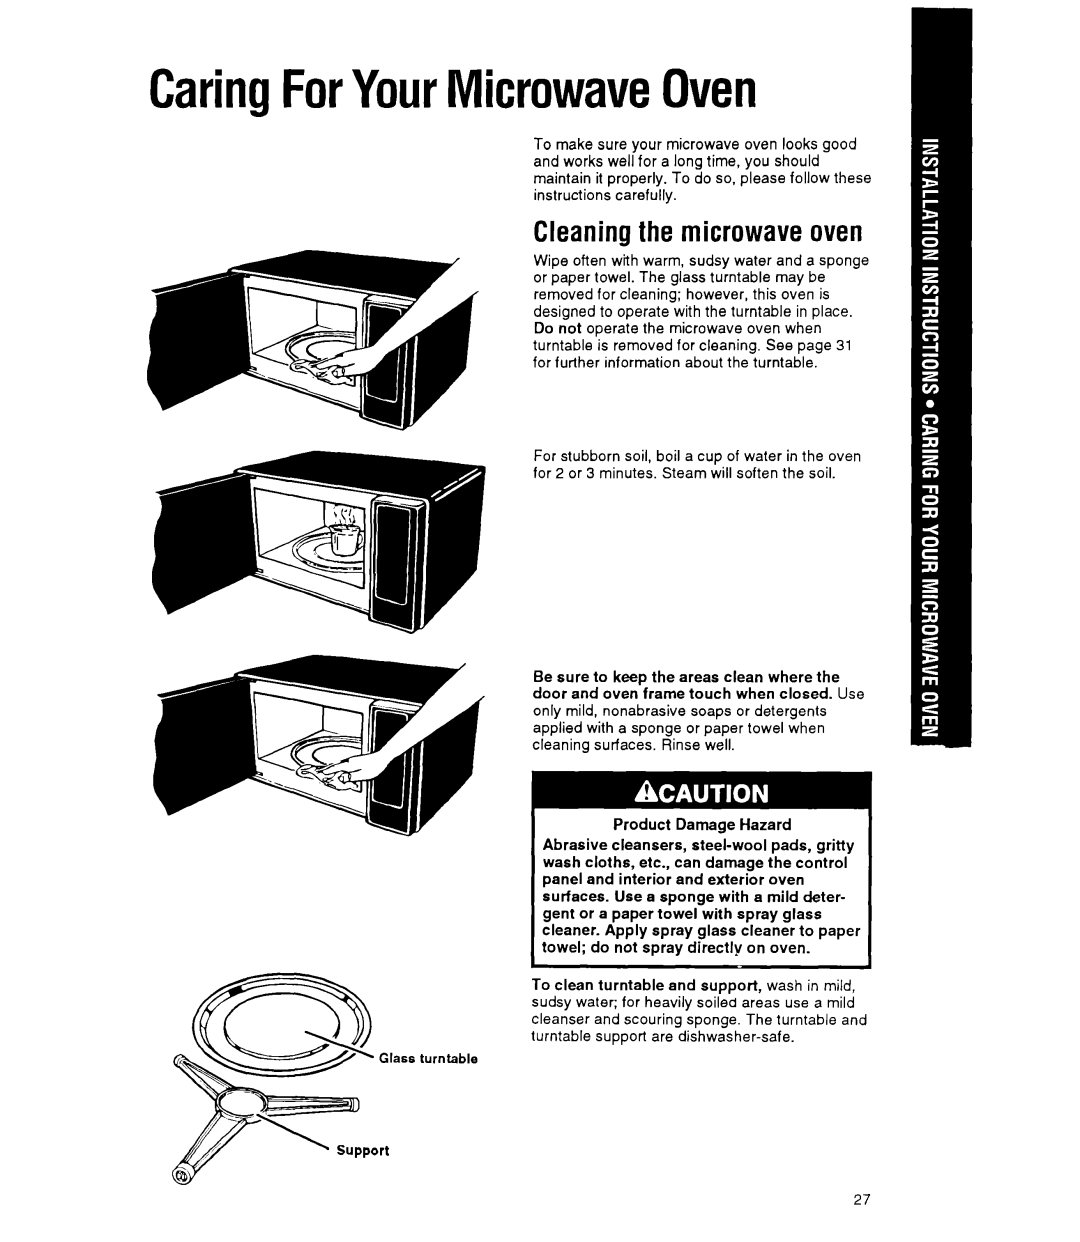 Whirlpool MT9160XY manual CaringForYourMicrowaveOven, Cleaning the microwave oven 